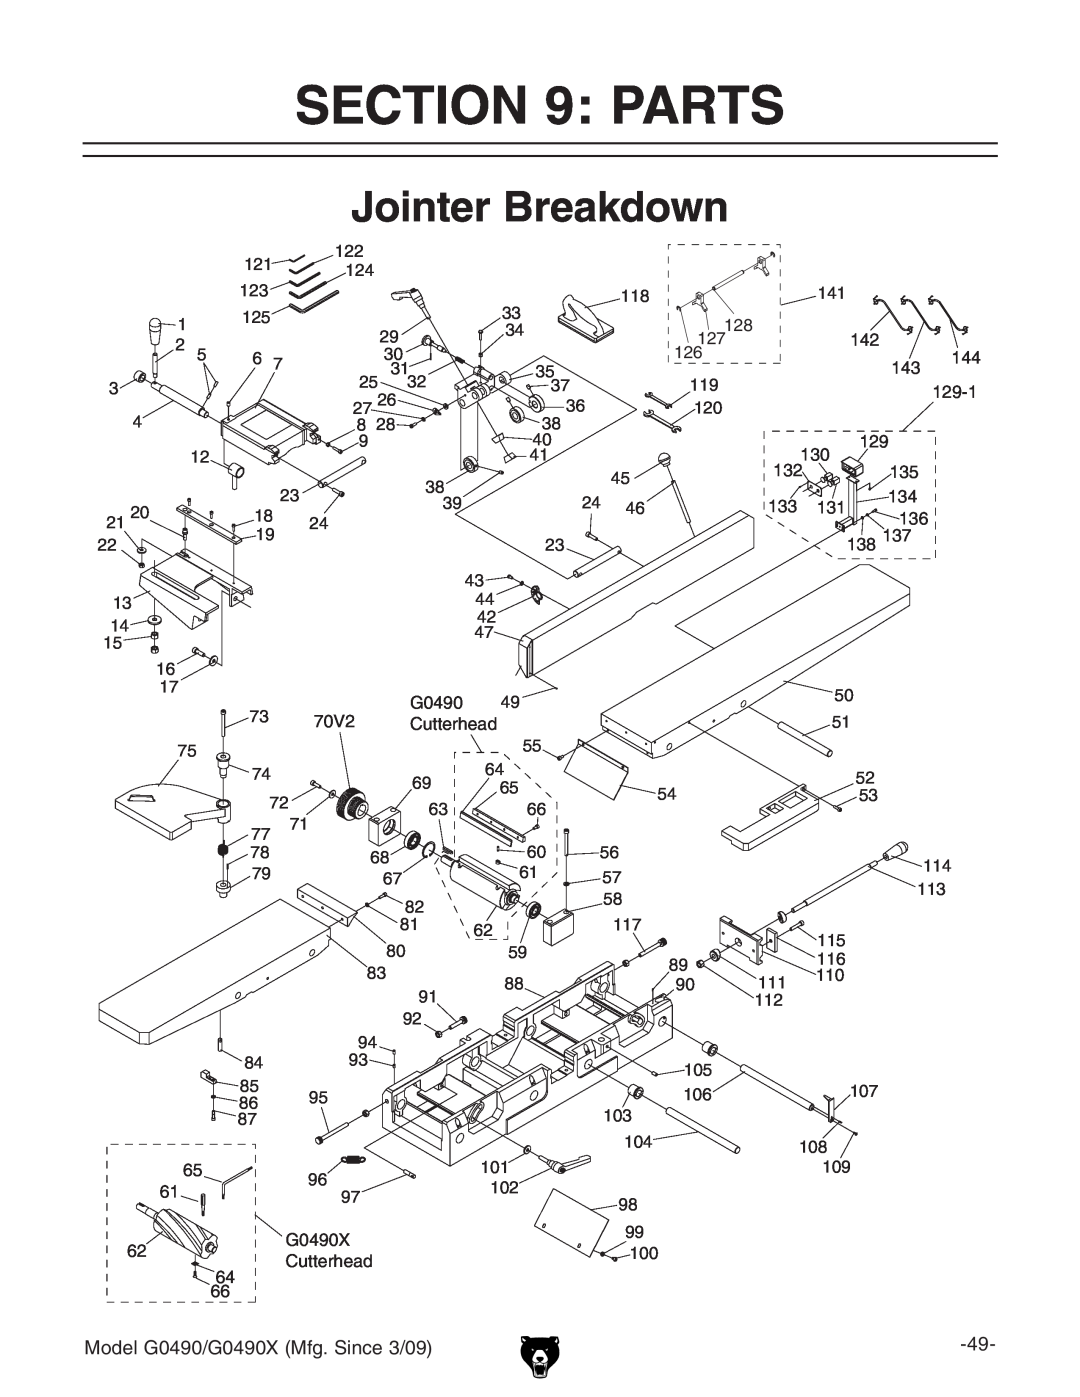 Grizzly G0490 owner manual Parts, Jointer Breakdown, BdYZa%.%$%.%MB\#HcXZ$%. 